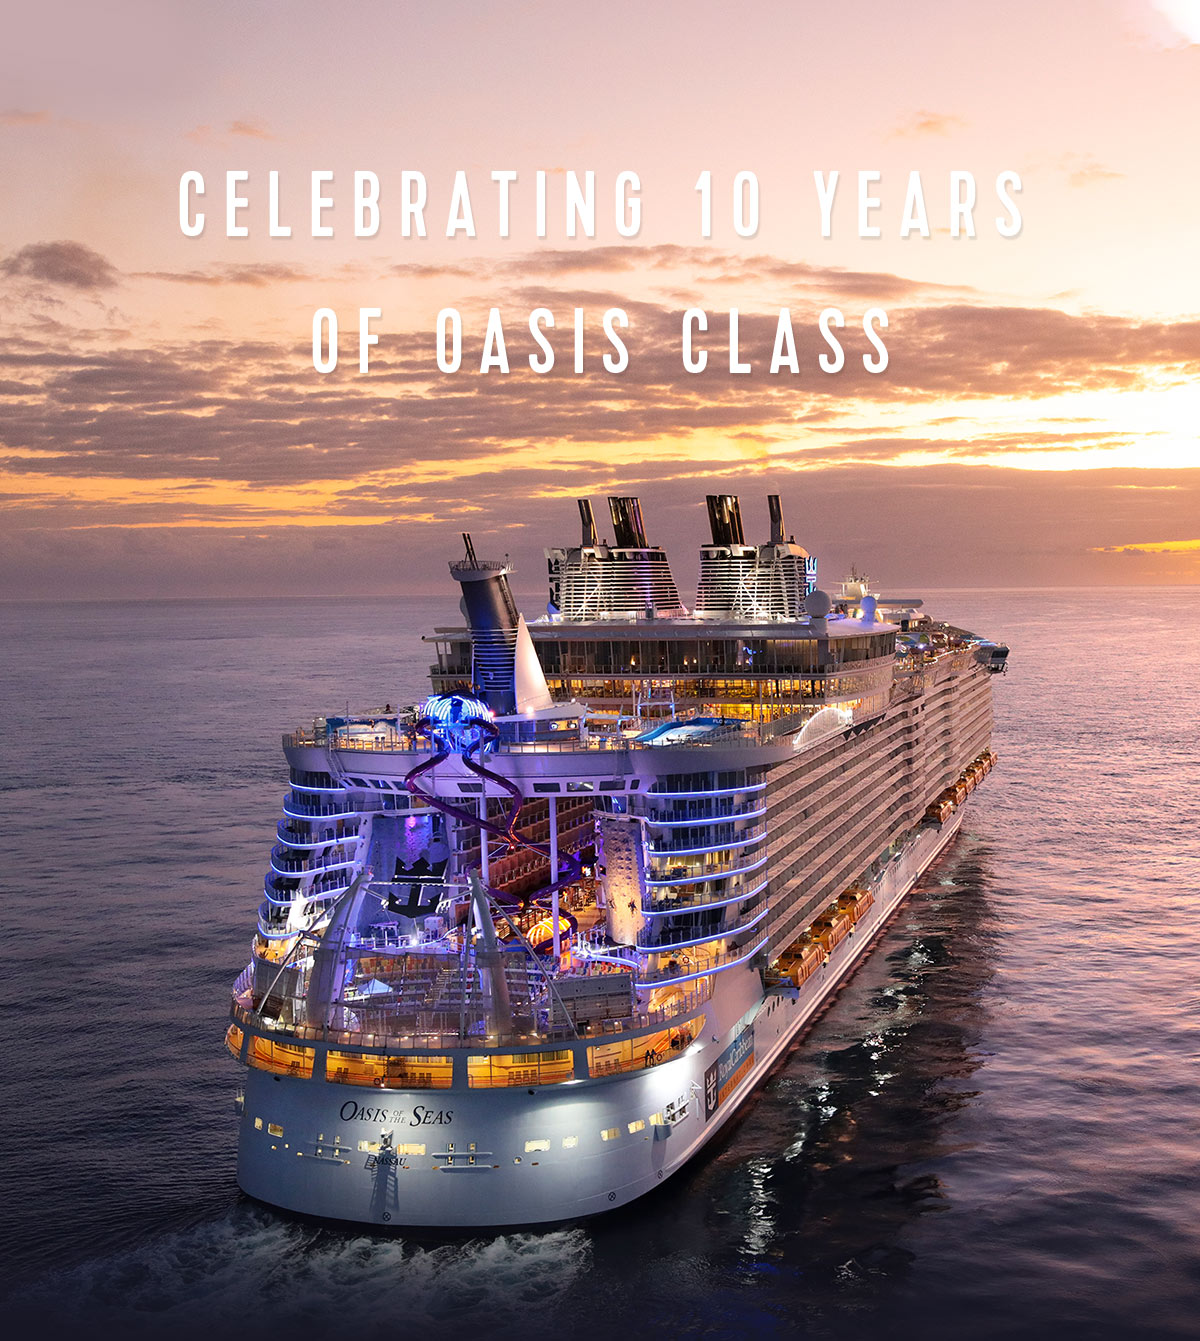 CELEBRATING 10 YEARS OF OASIS CLASS